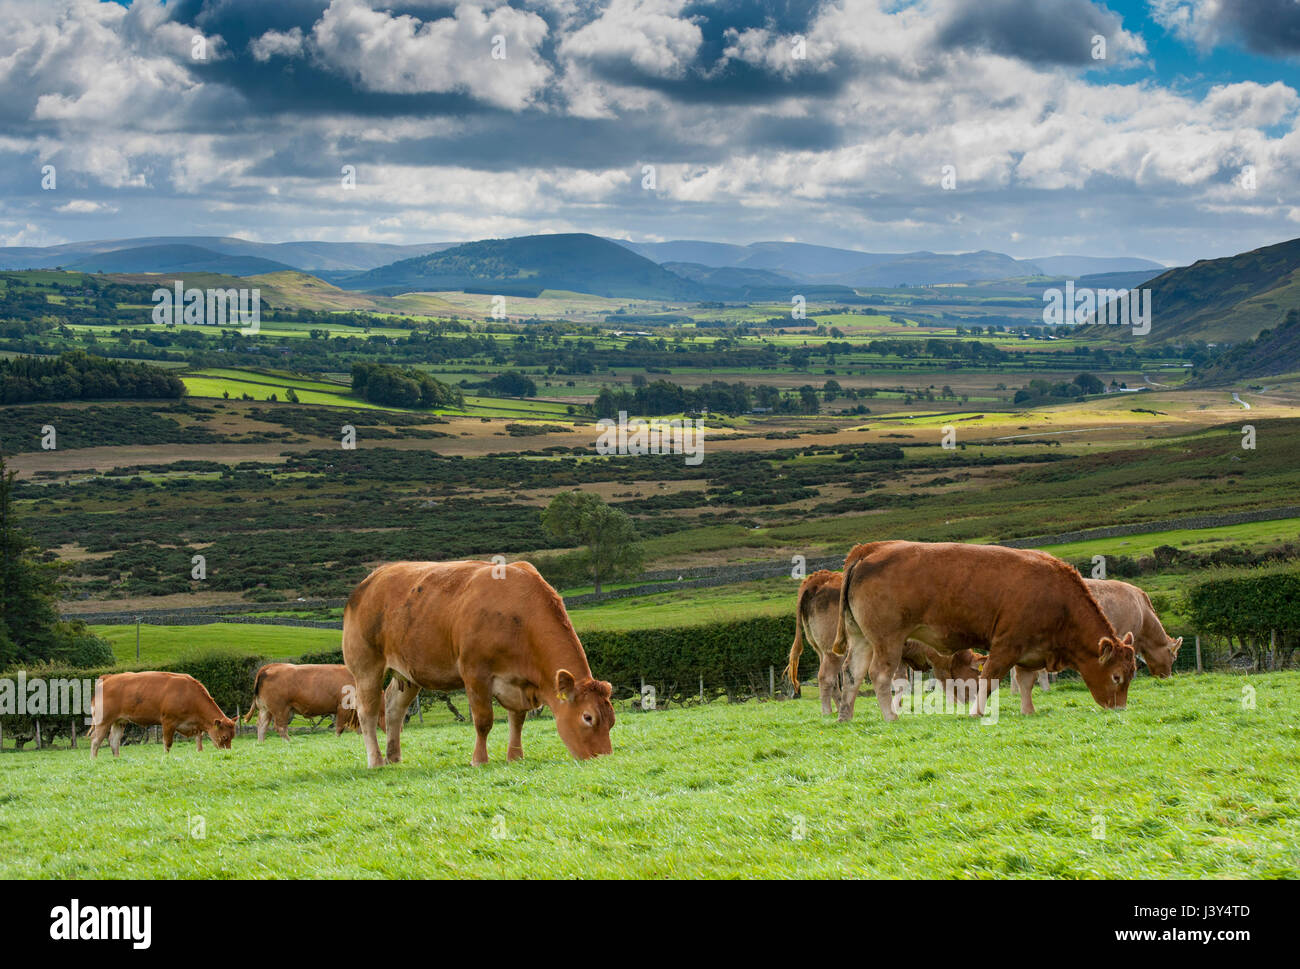 Limousin cattle near Hesket Newmarket, Cumbria looking towards Mungrisedale. Lake District.UK Stock Photo